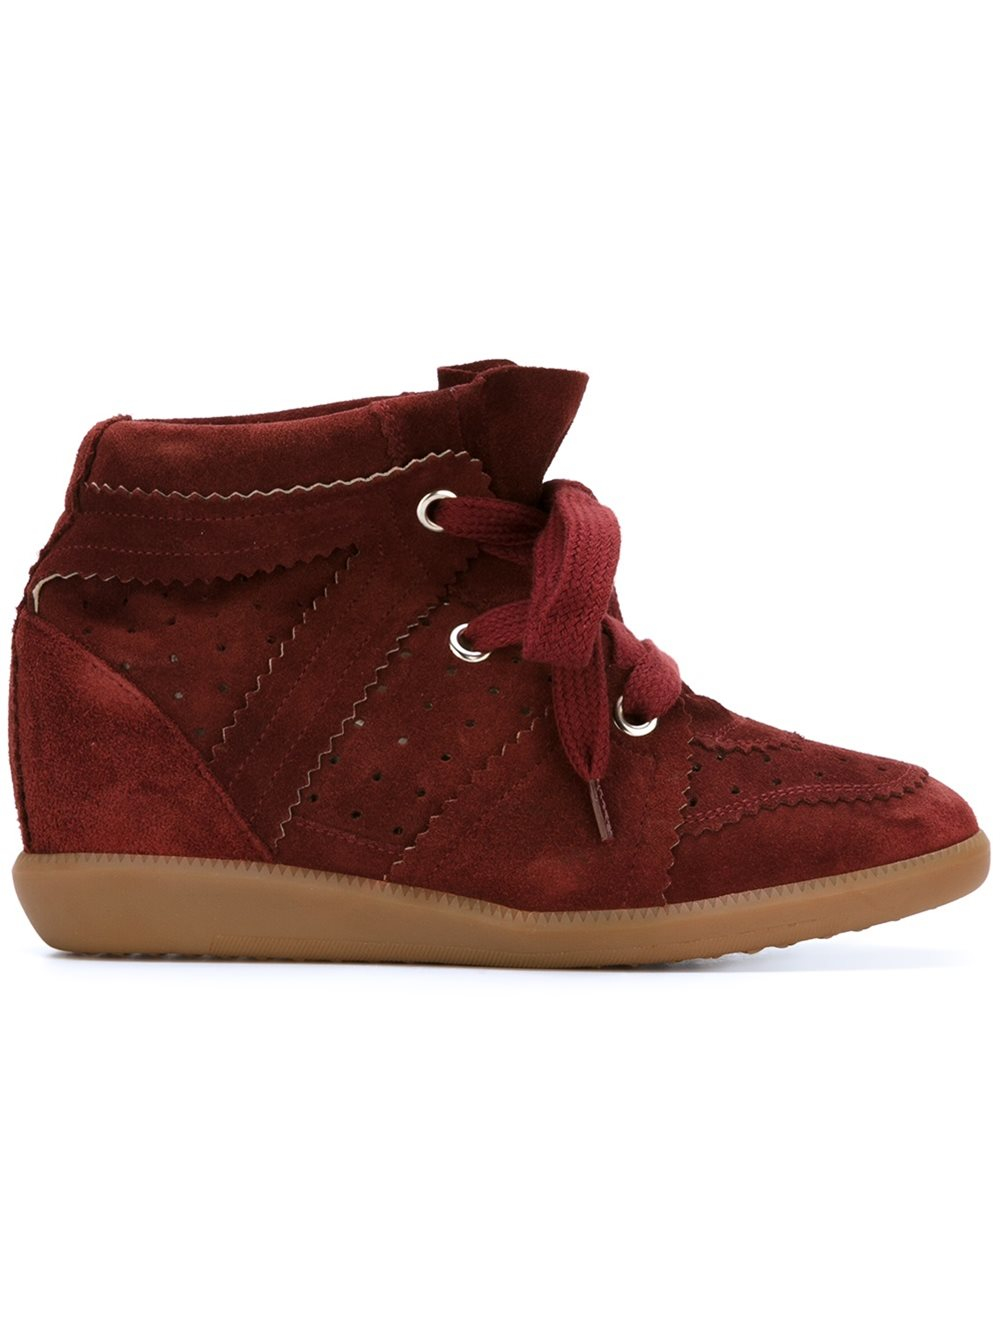 Isabel Marant Suede Bobby Wedge Sneakers - Lyst